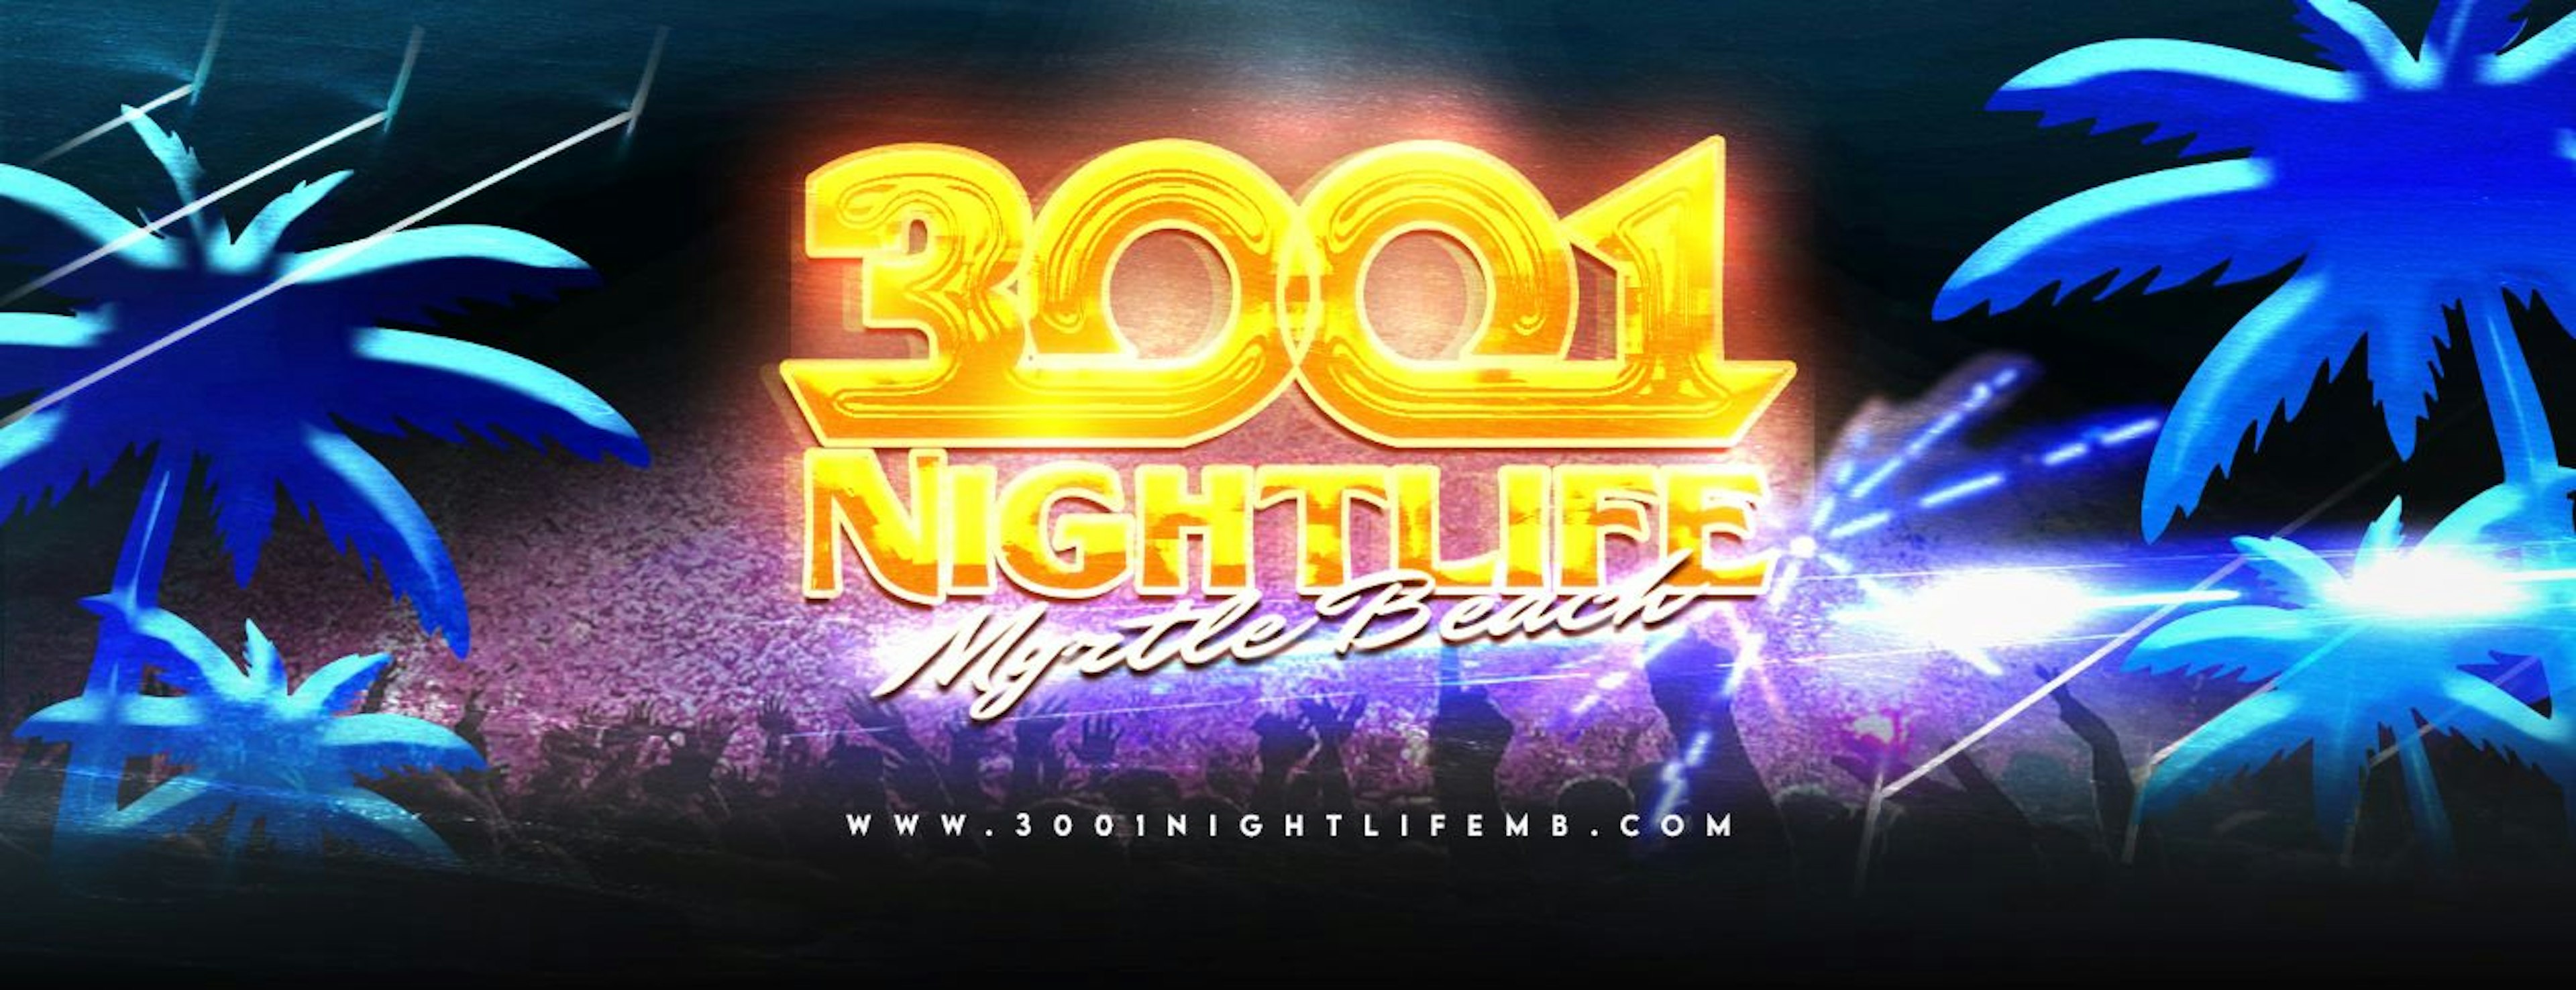 3001 Nightlife's 3rd Anniversary Party